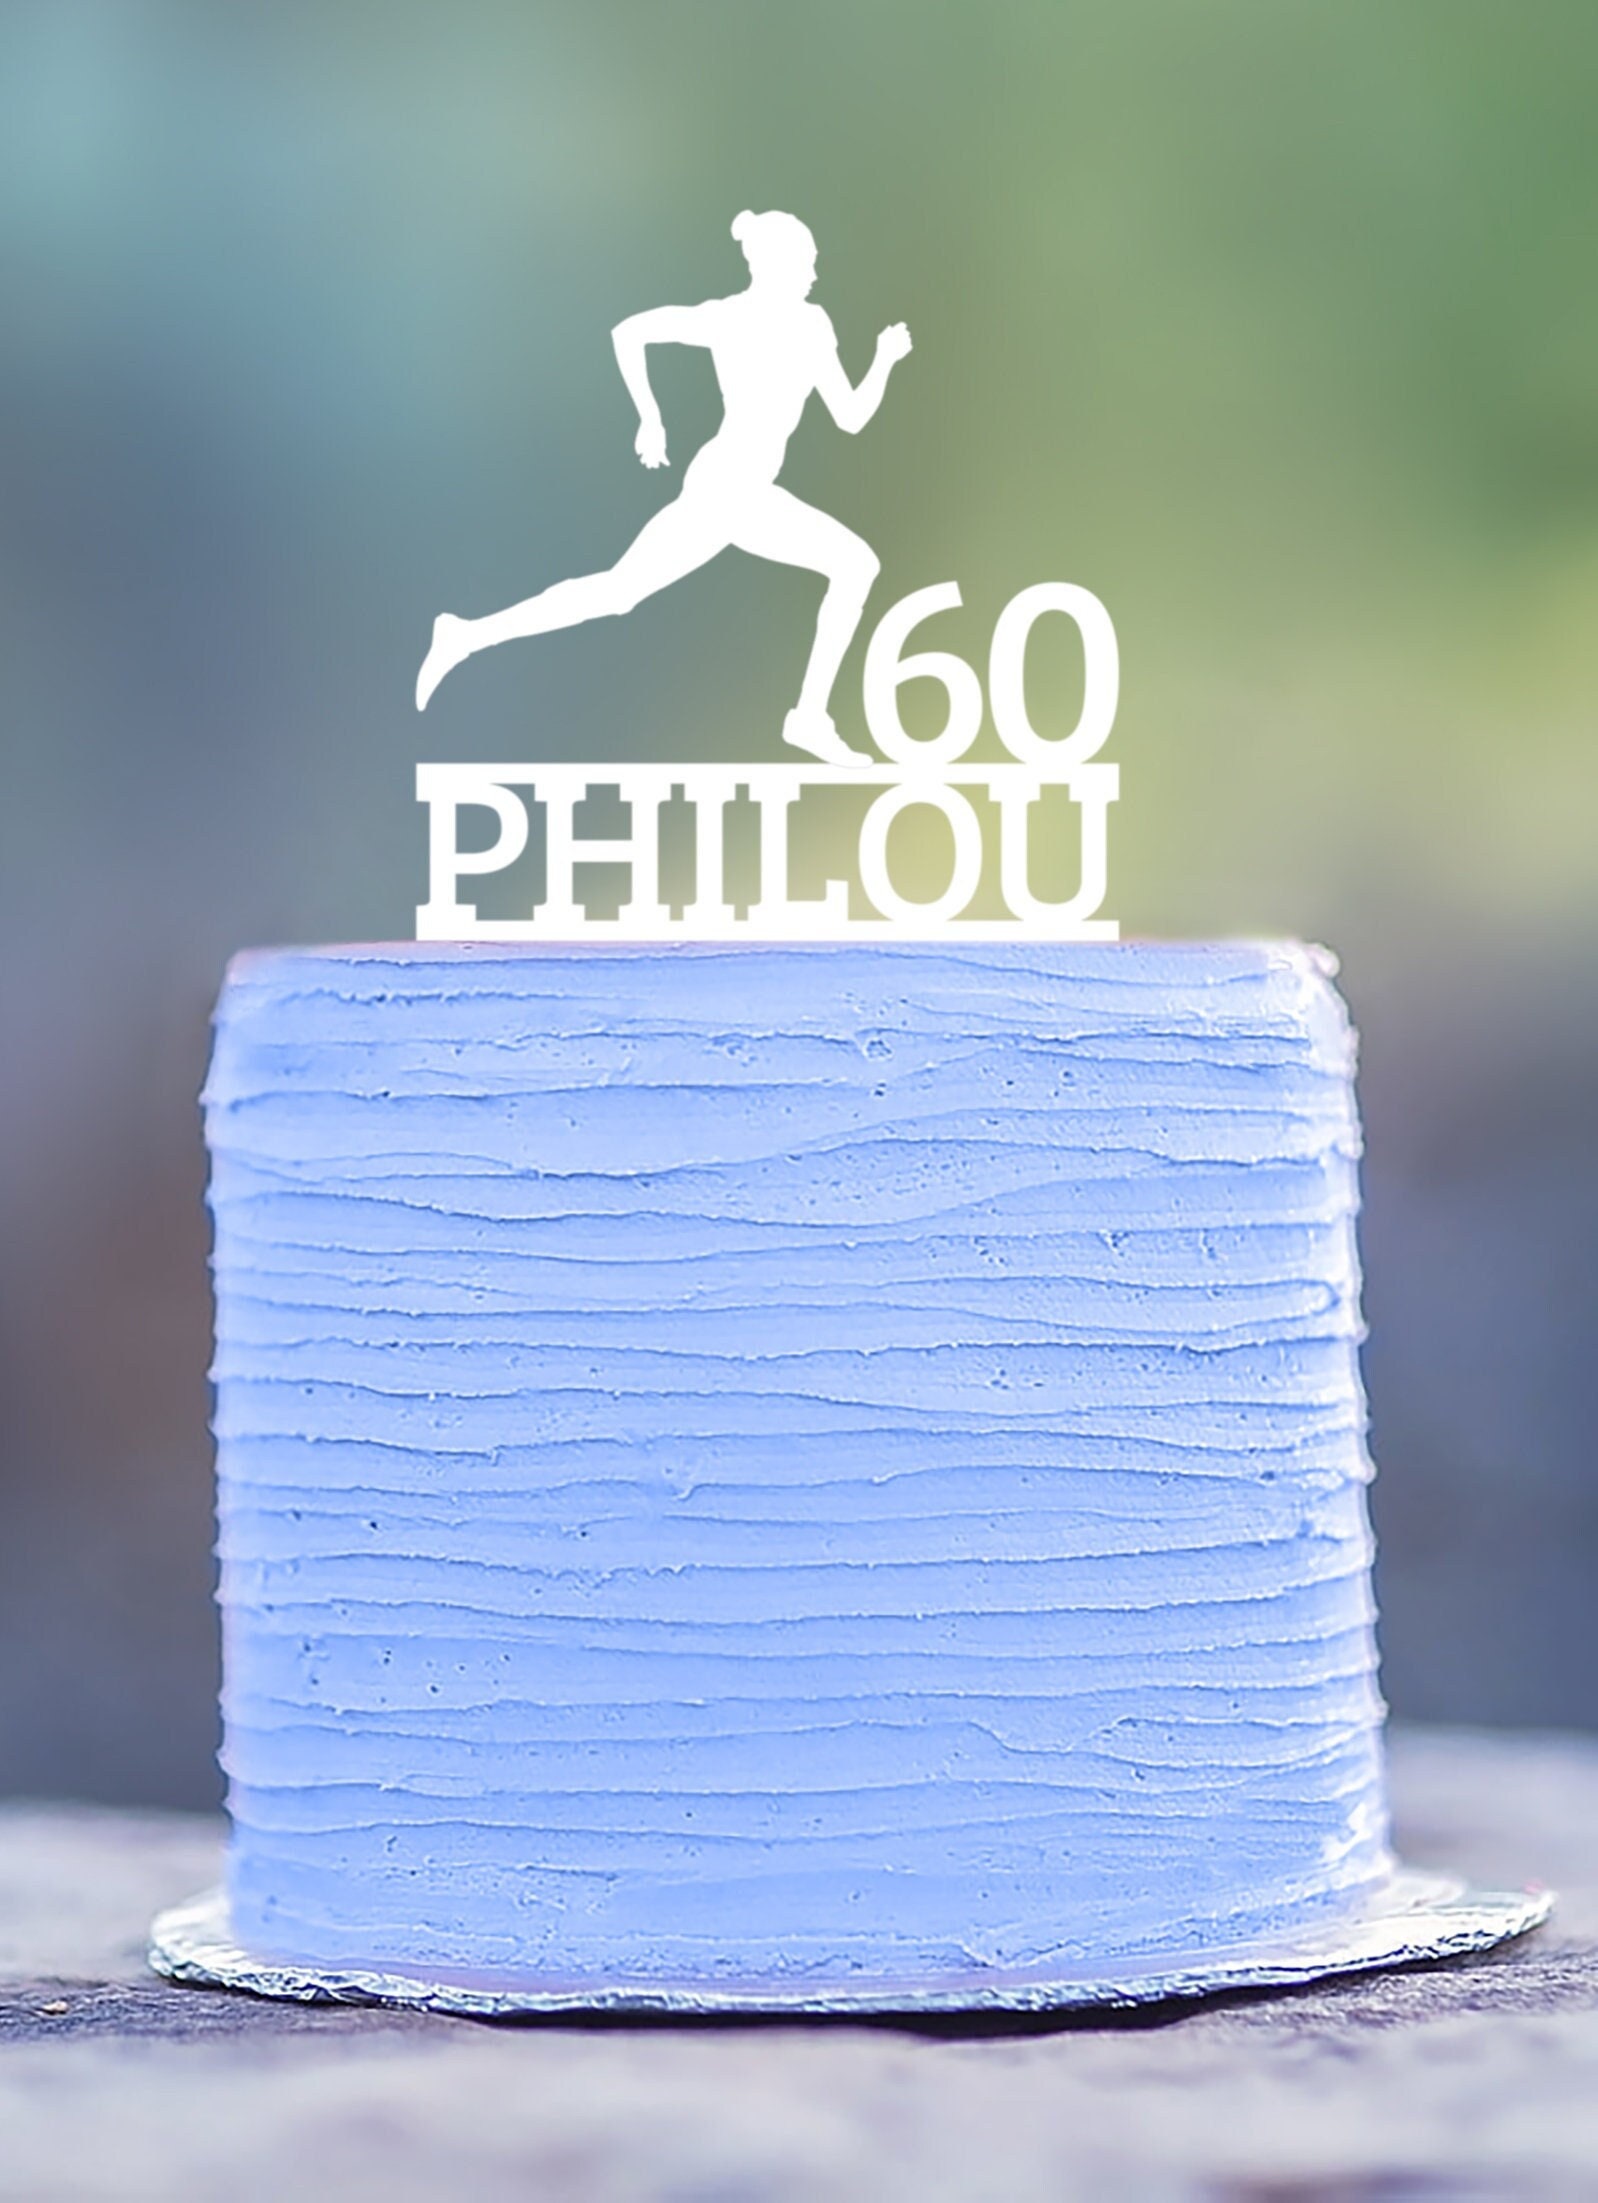 Runner Cake Topper Birthday,personalized Running Cake Topper  Birthday,custom Marathon Runner Athlete Birthday Cake Topper With Name,b312  